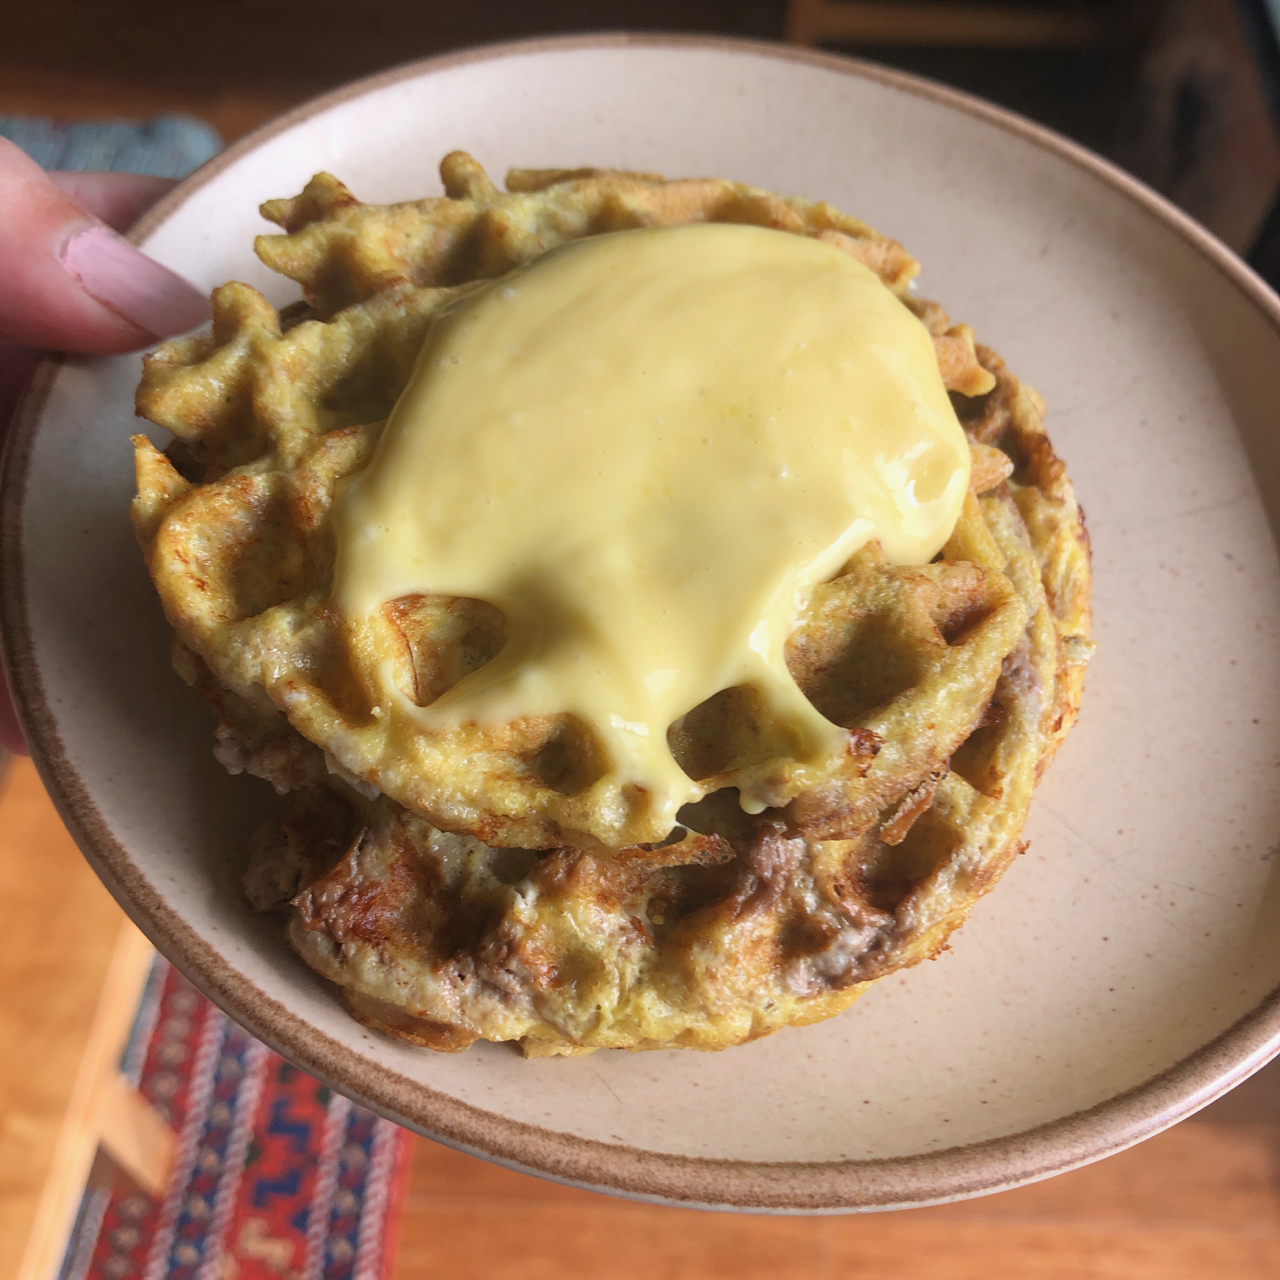 My Last Supper (Carnivore Waffles and Carnivore Hollandaise Sauce, courtesy of Maria and Craig Emmerich's new Carnivore Cookbook).